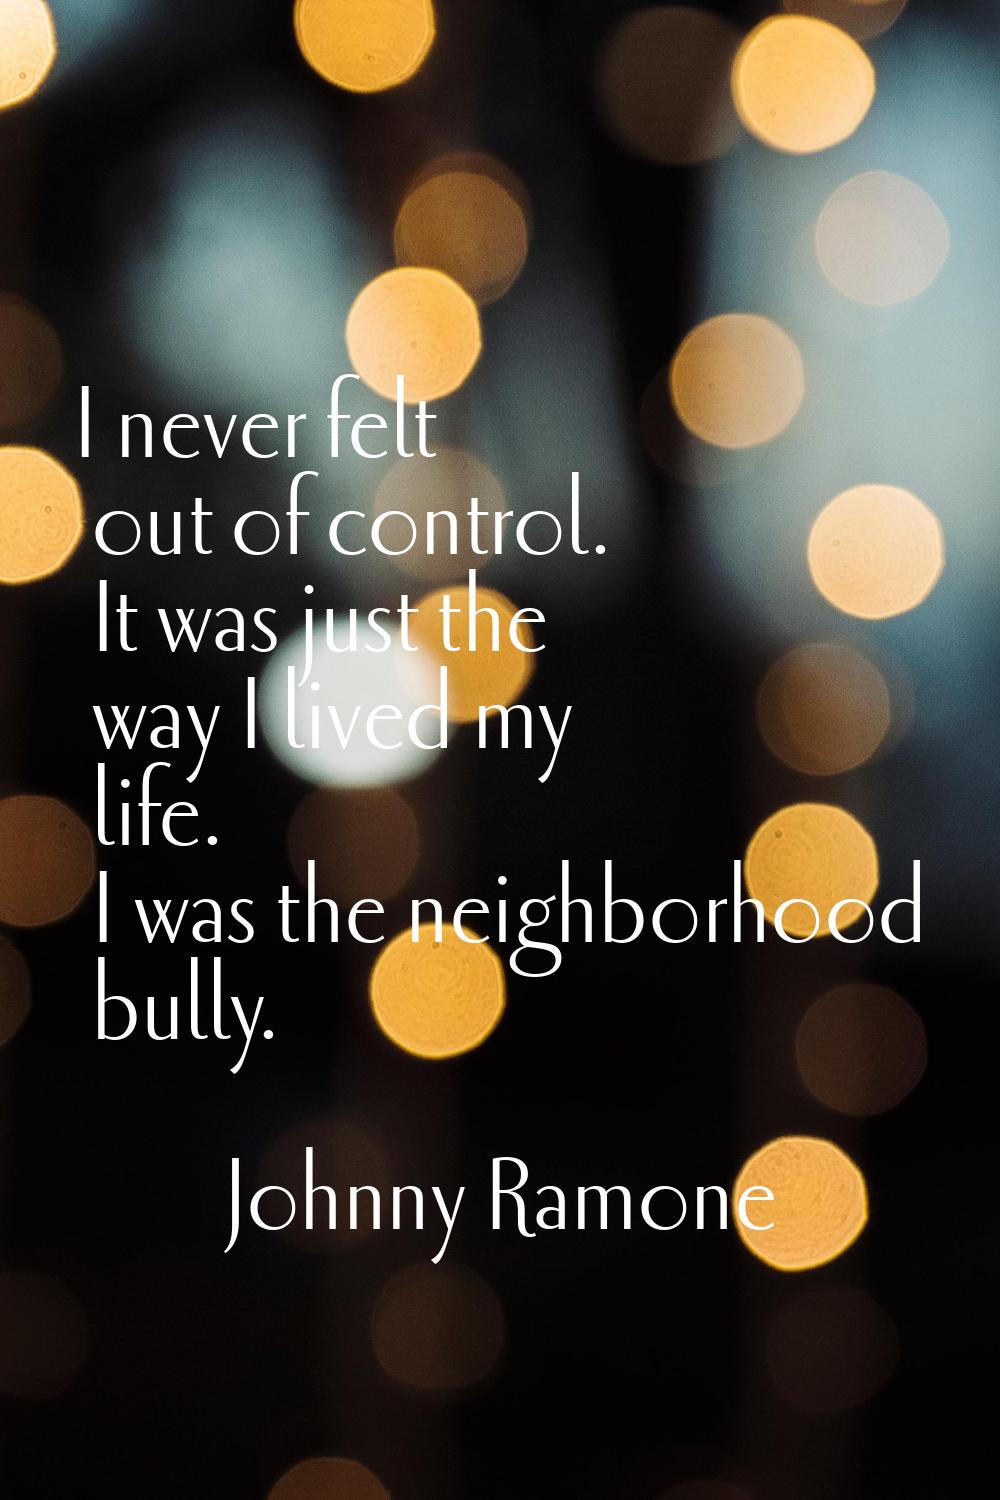 I never felt out of control. It was just the way I lived my life. I was the neighborhood bully.